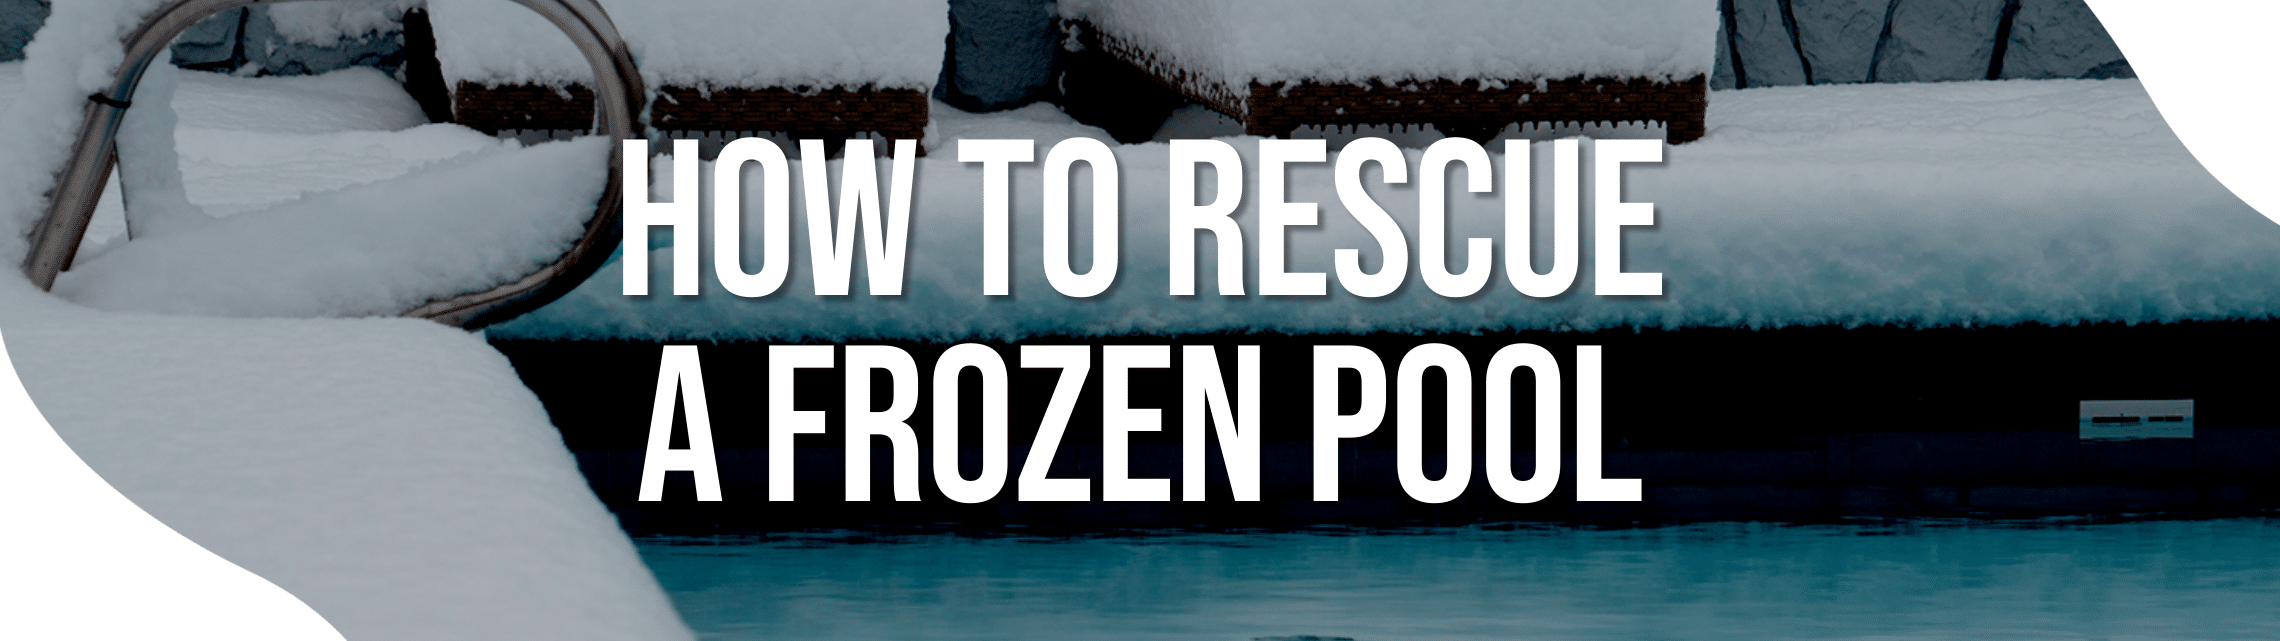 How to Rescue a Frozen Pool